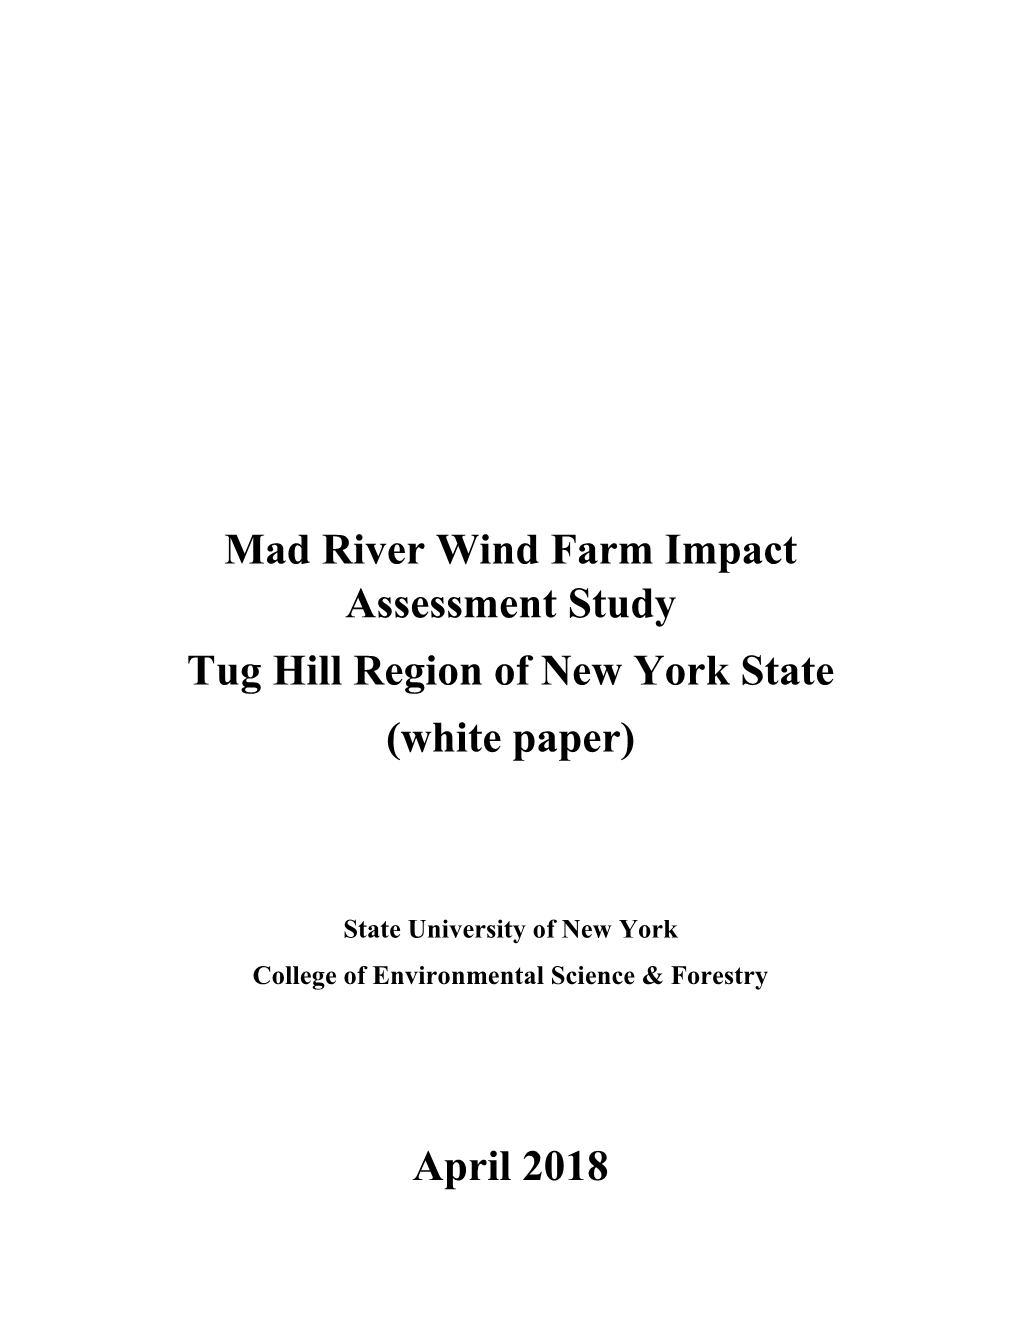 Mad River Wind Farm Impact Assessment Study Tug Hill Region of New York State (White Paper)